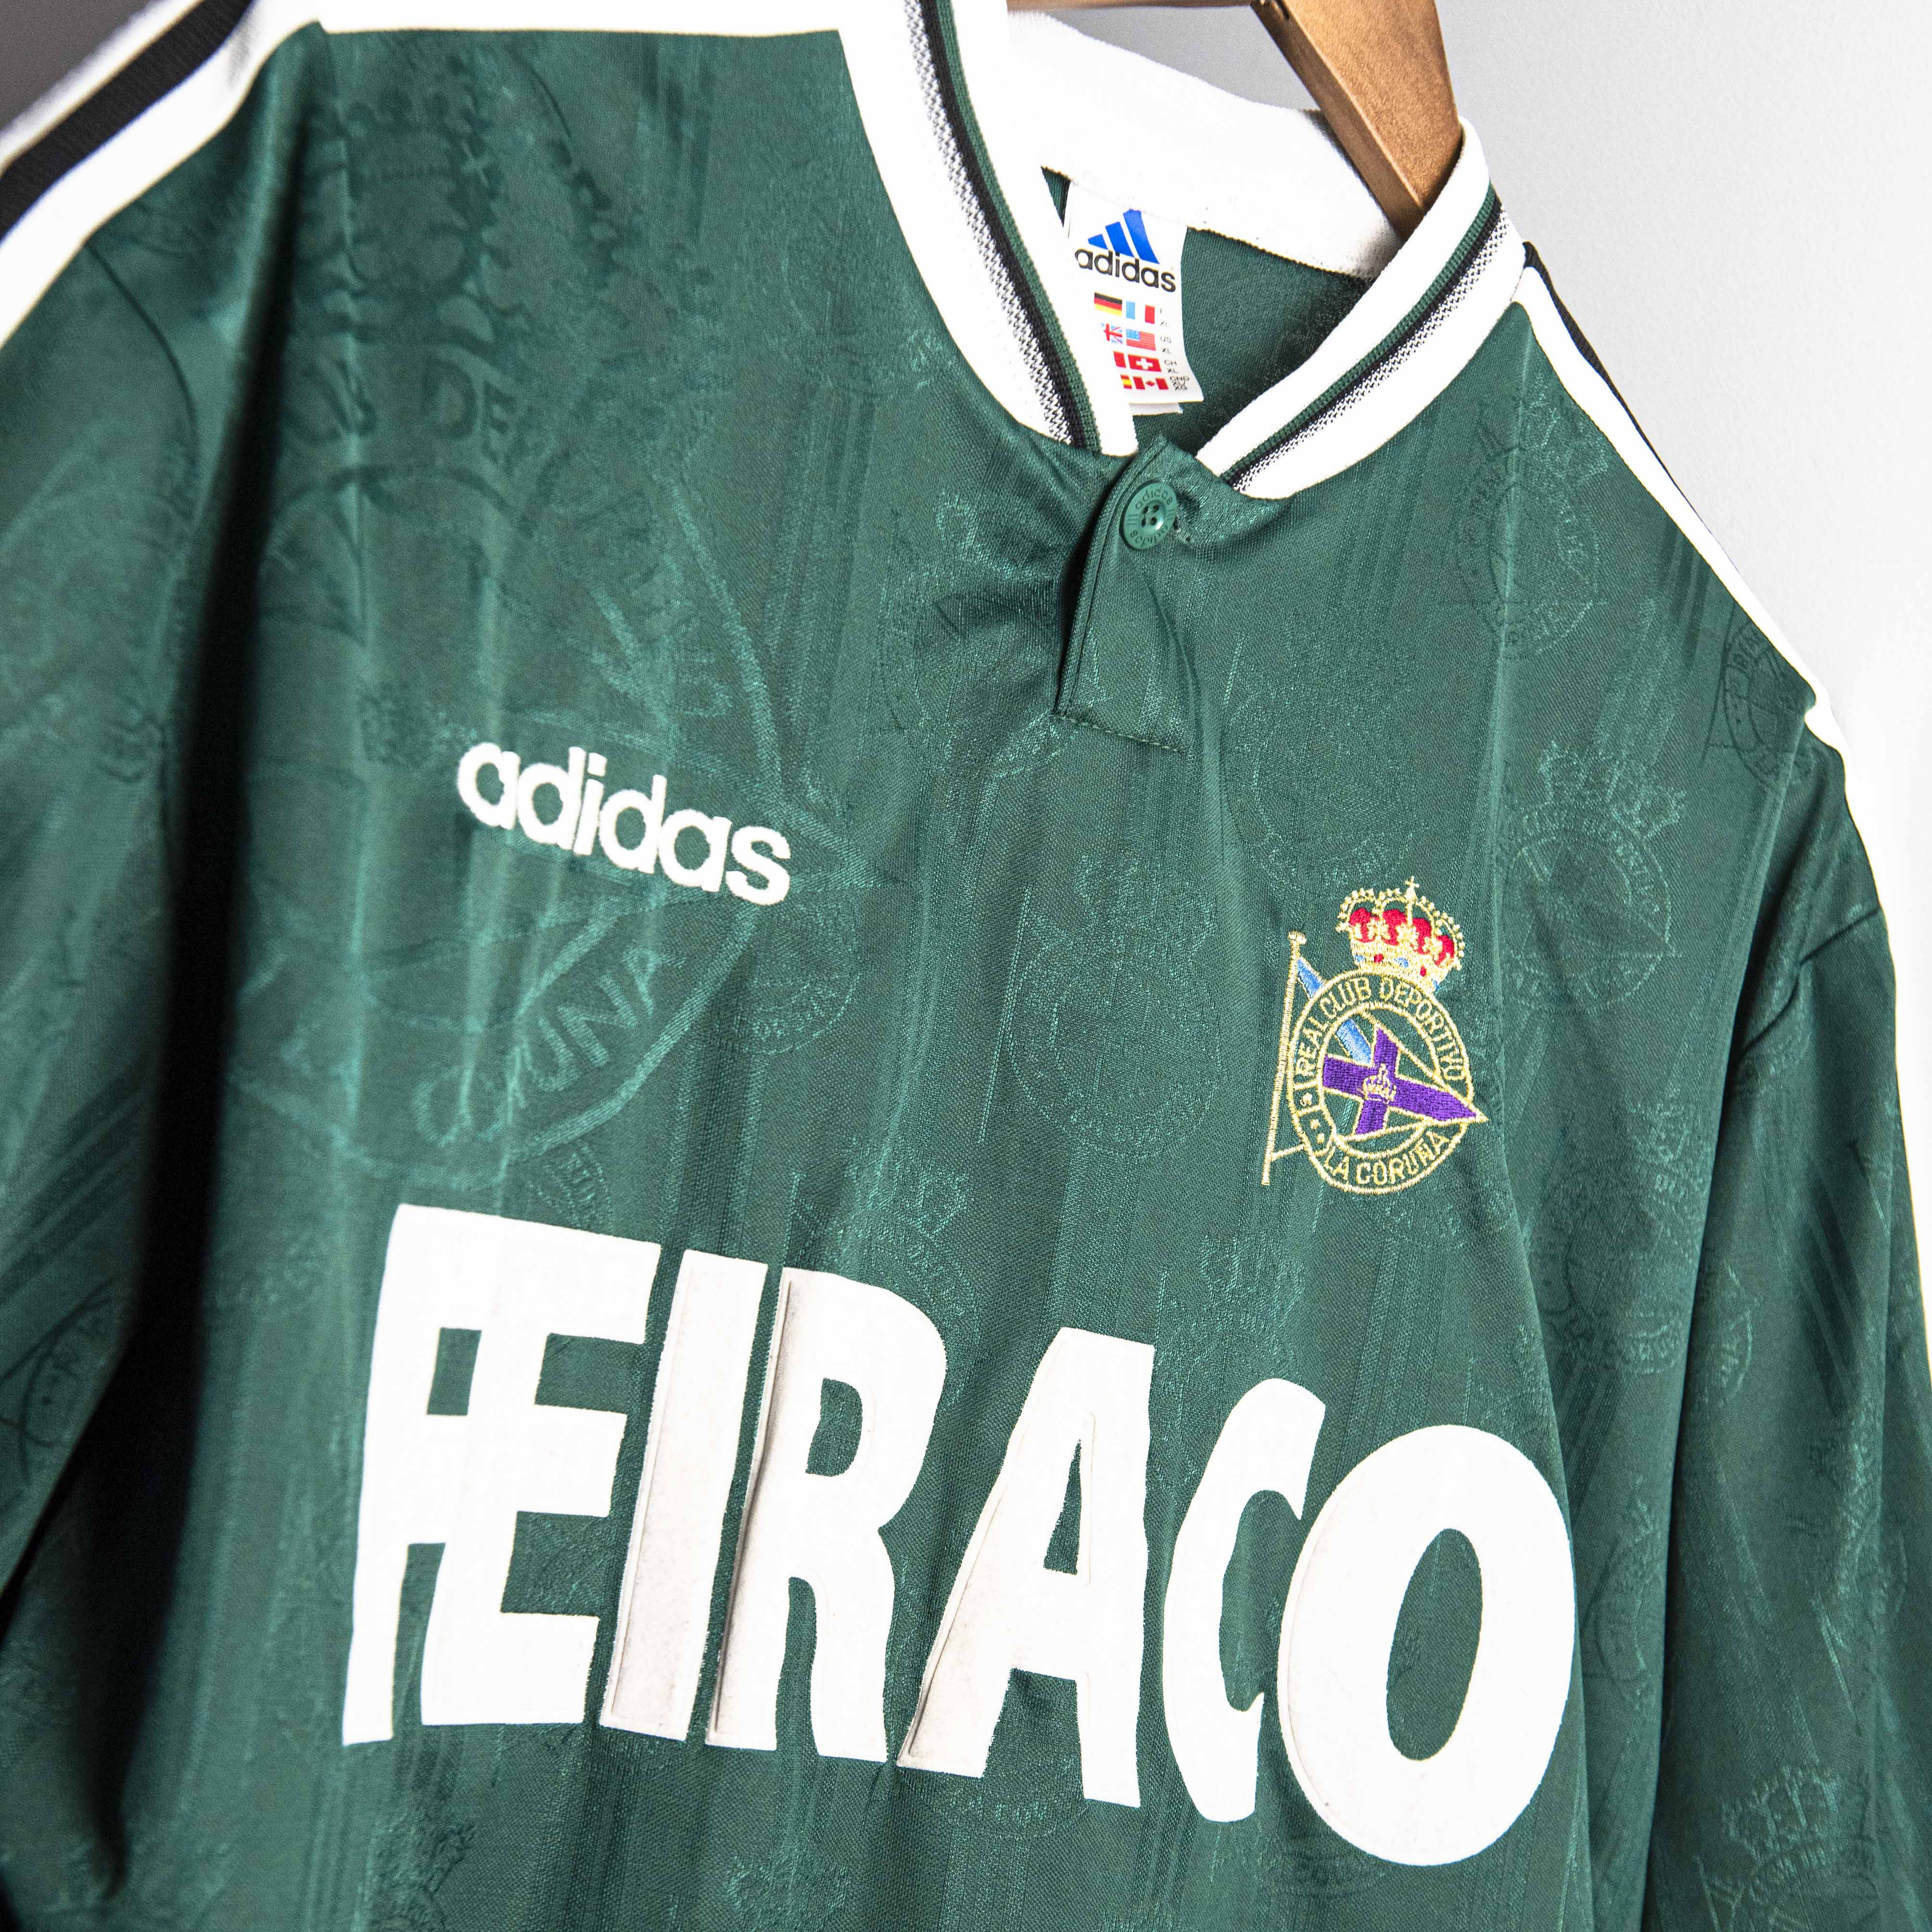 Football Shirts on Twitter: "Deportivo La Coruña 1996 Away by adidas 🇪🇸 the site on Friday 14:00 Time) in a size XL. https://t.co/9WCZtPgTYb" / Twitter